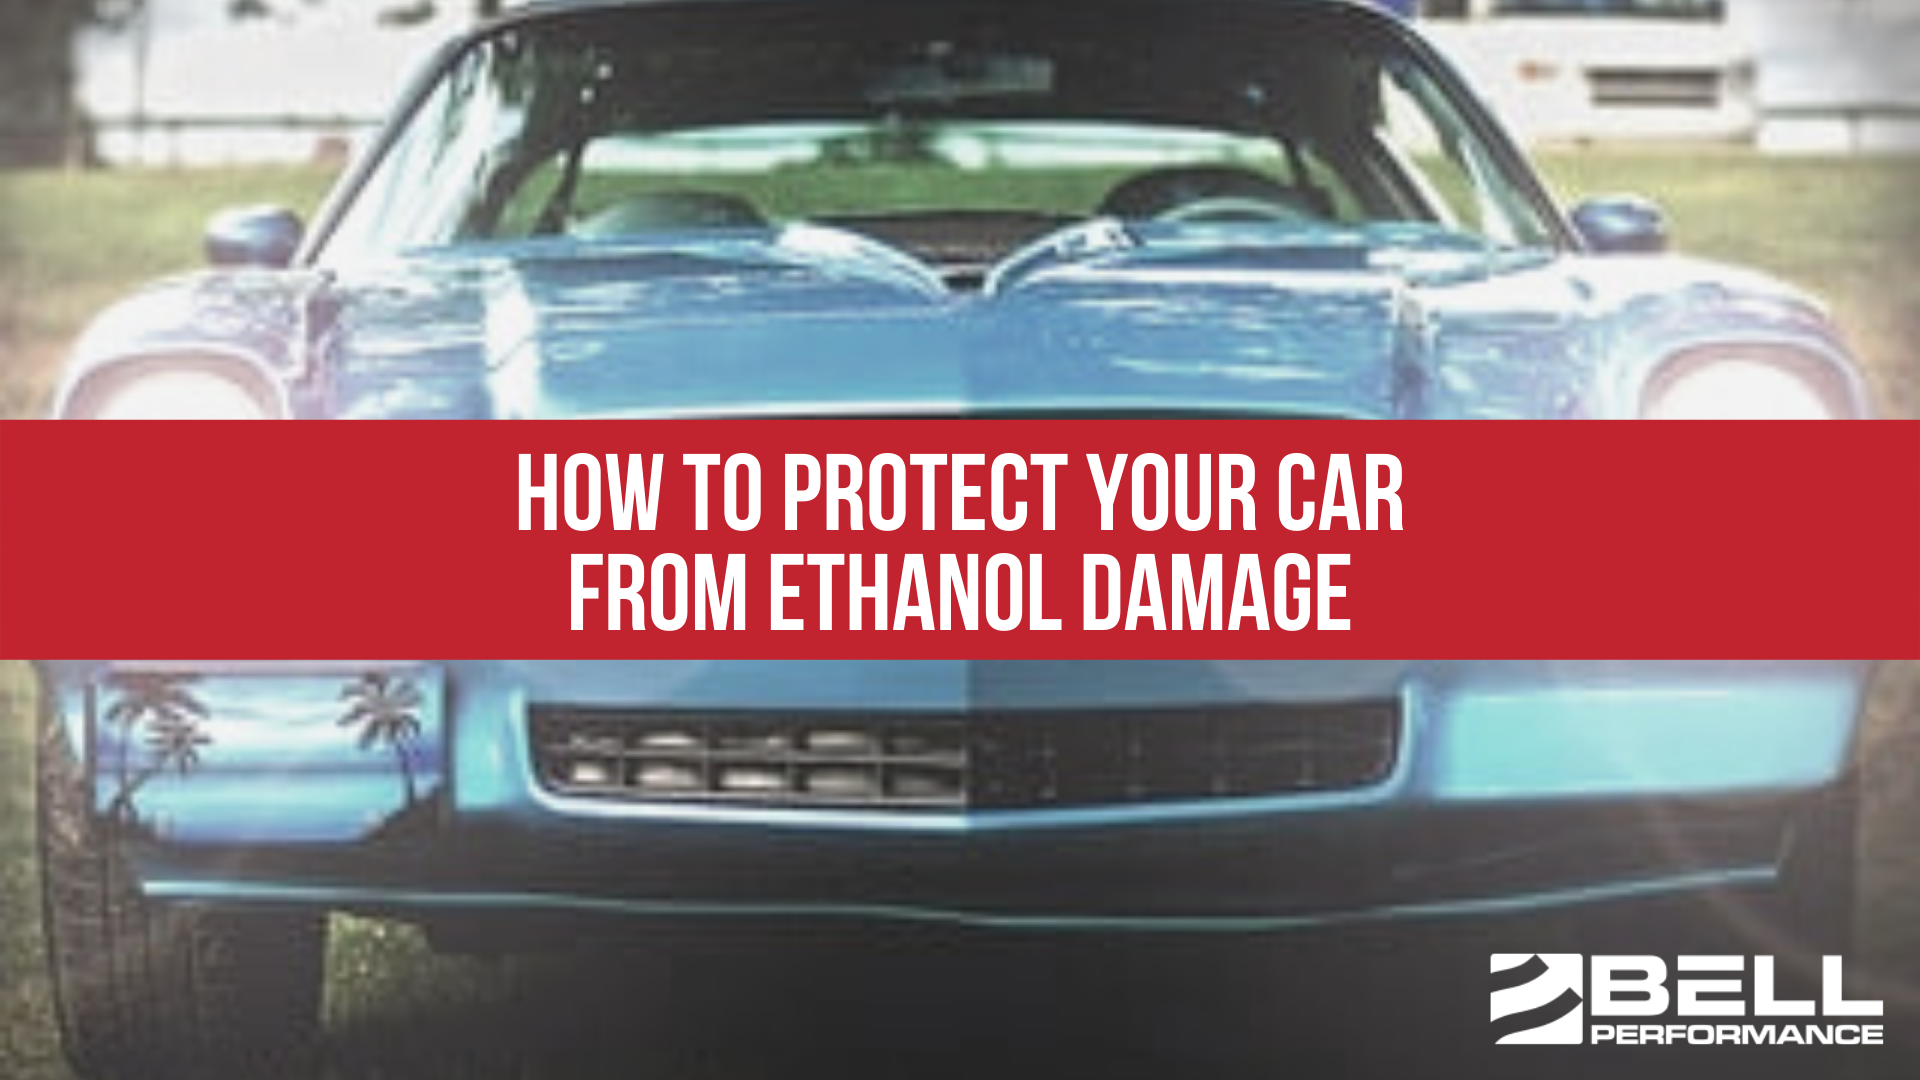 How to Protect Your Car From Ethanol Damage